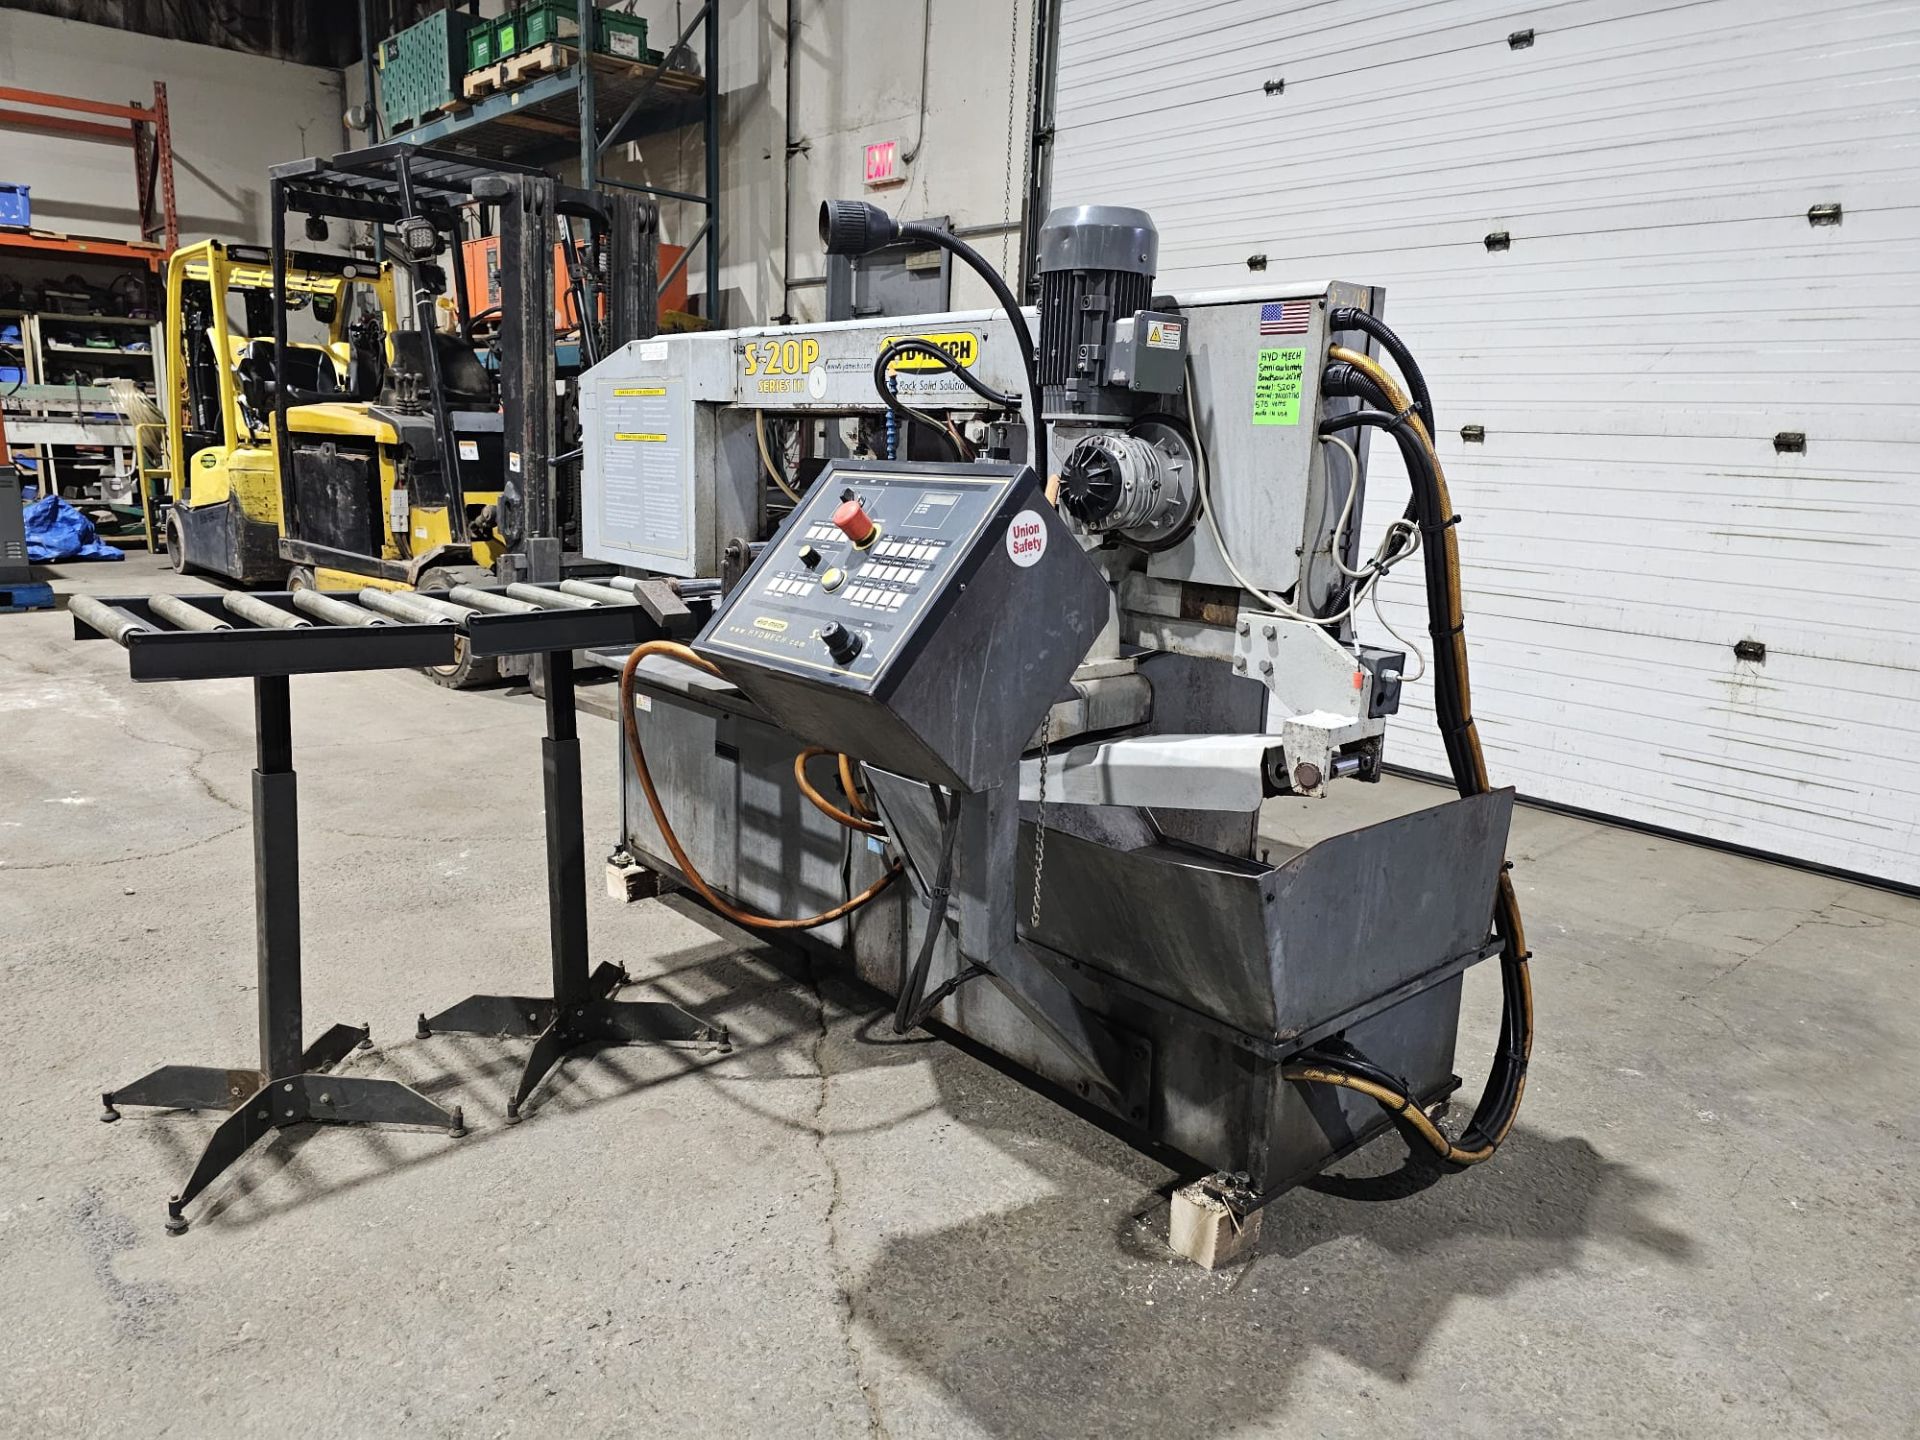 Hyd-Mech Semi Automatic Bandsaw 20" x 14" Cutting Capacity Model: S20P 3 phase - Image 17 of 17